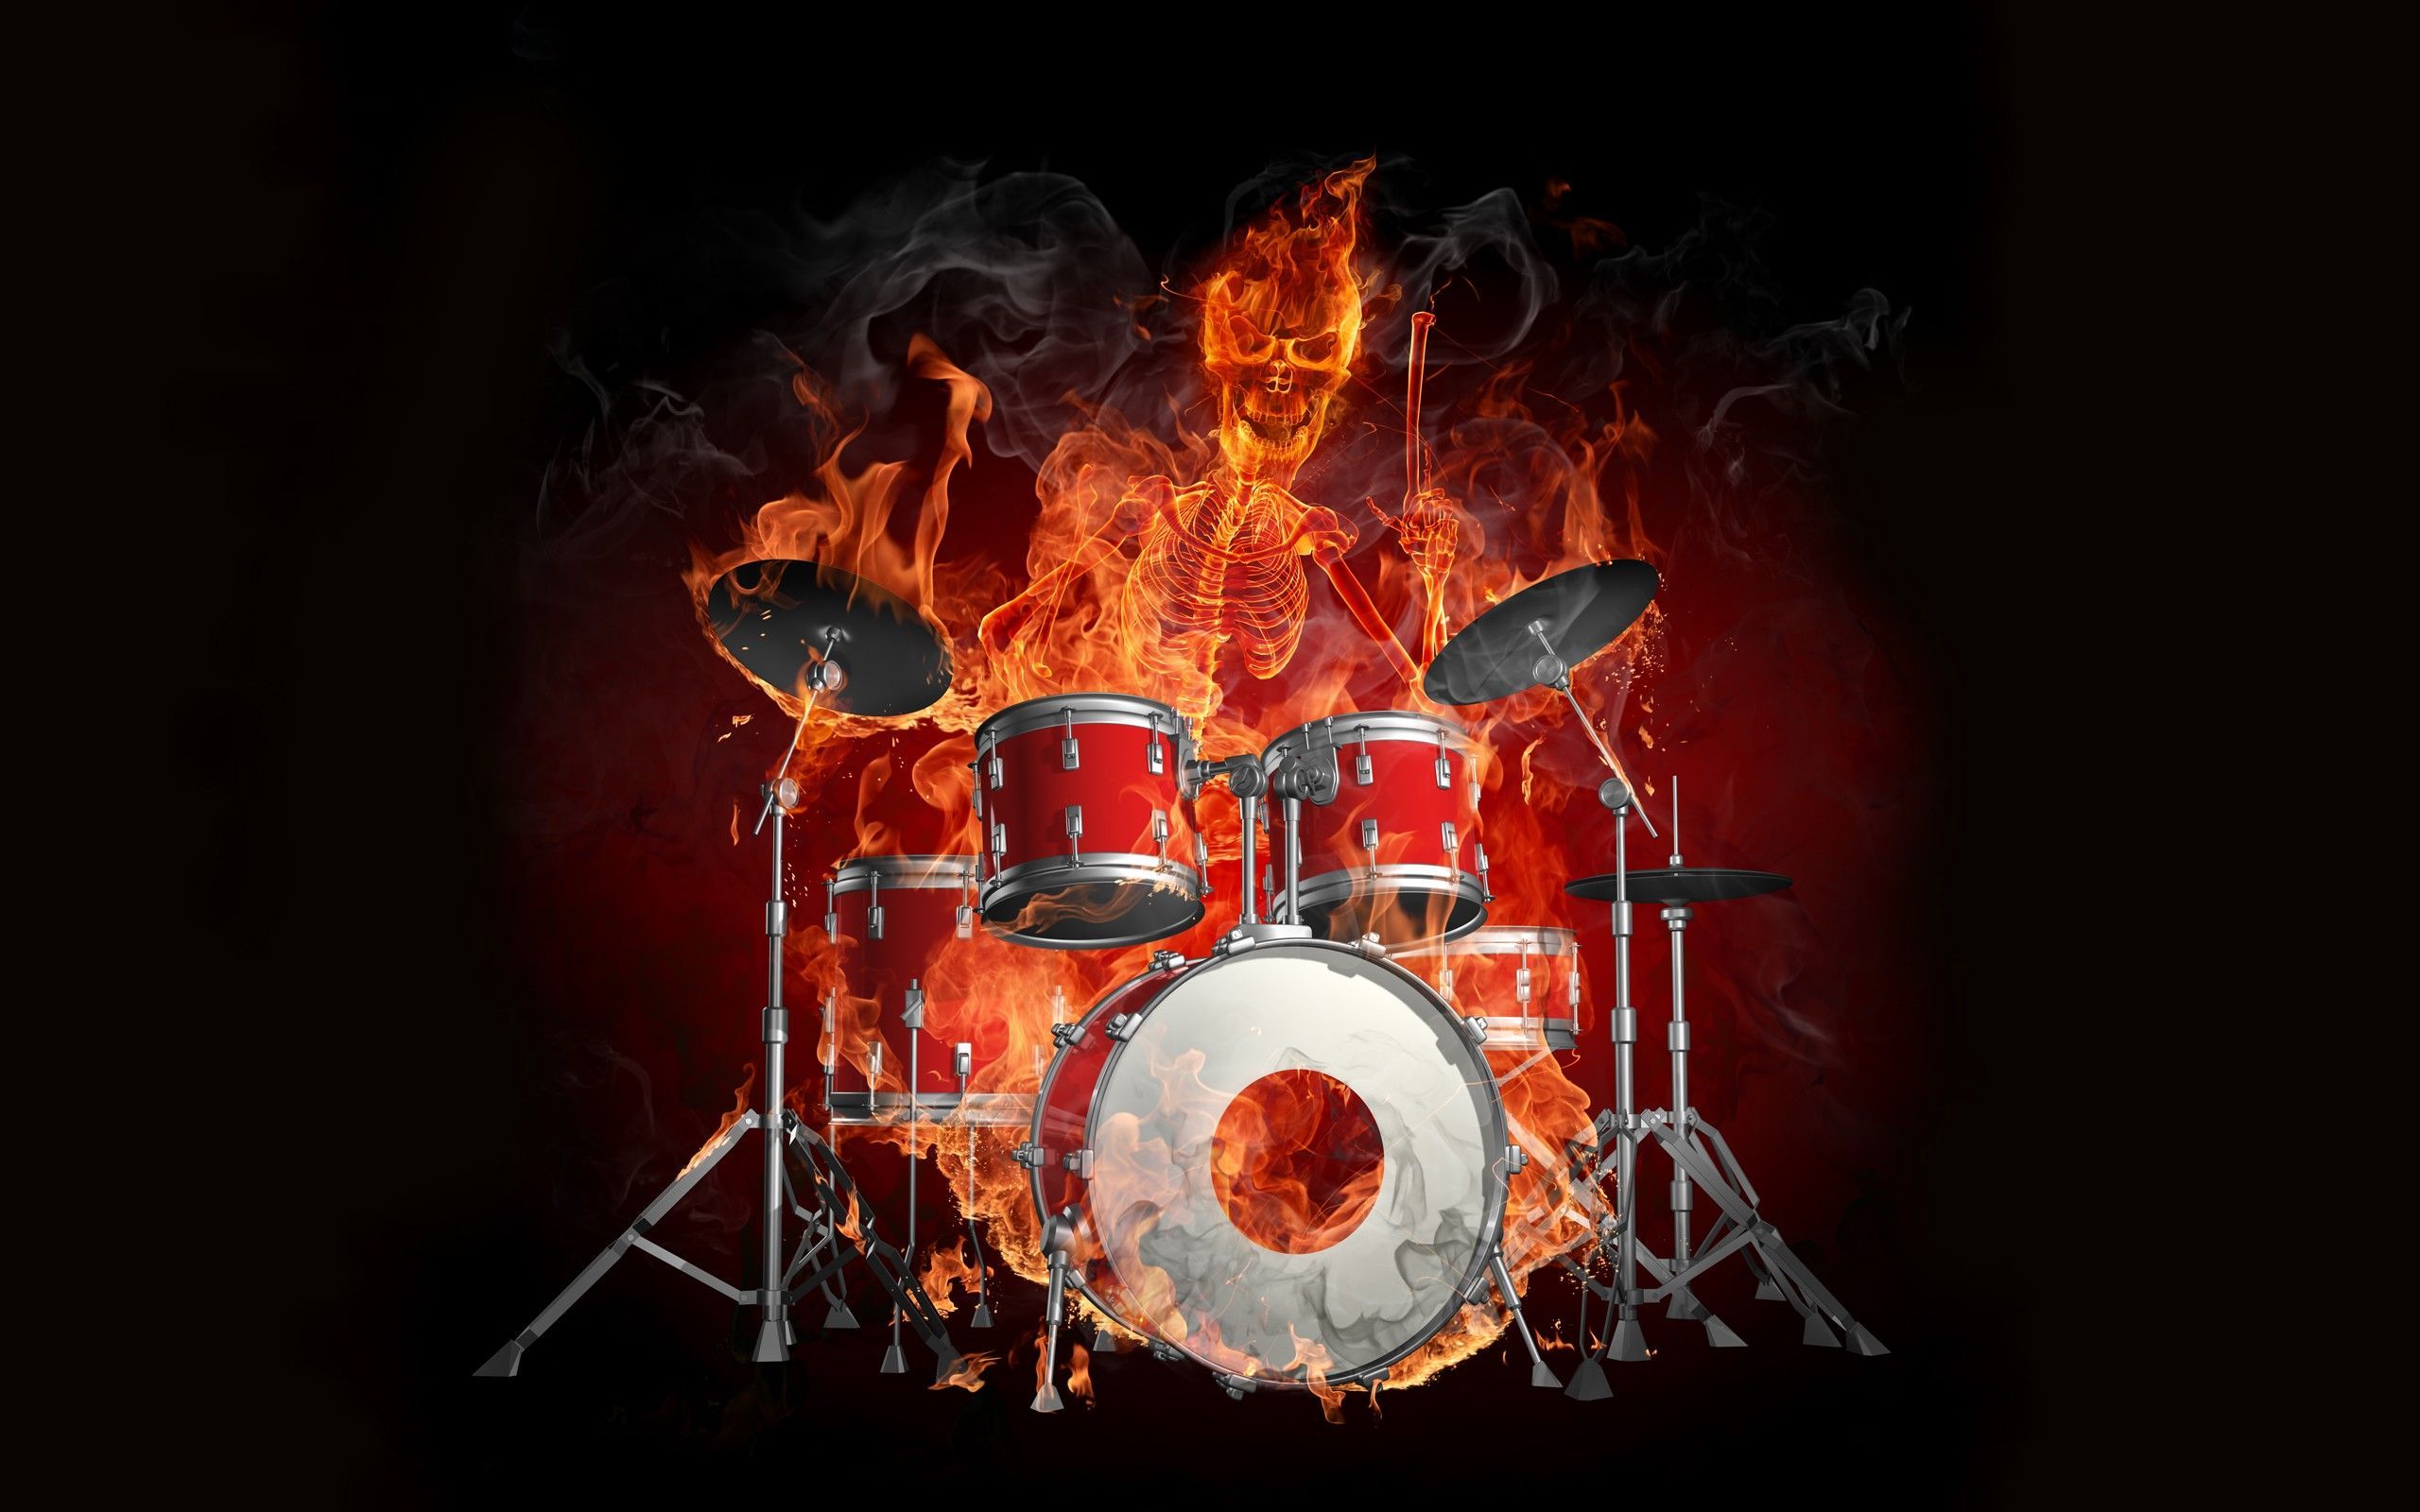 Download Animated Flames Fire Drums Music Wallpaper Black ...